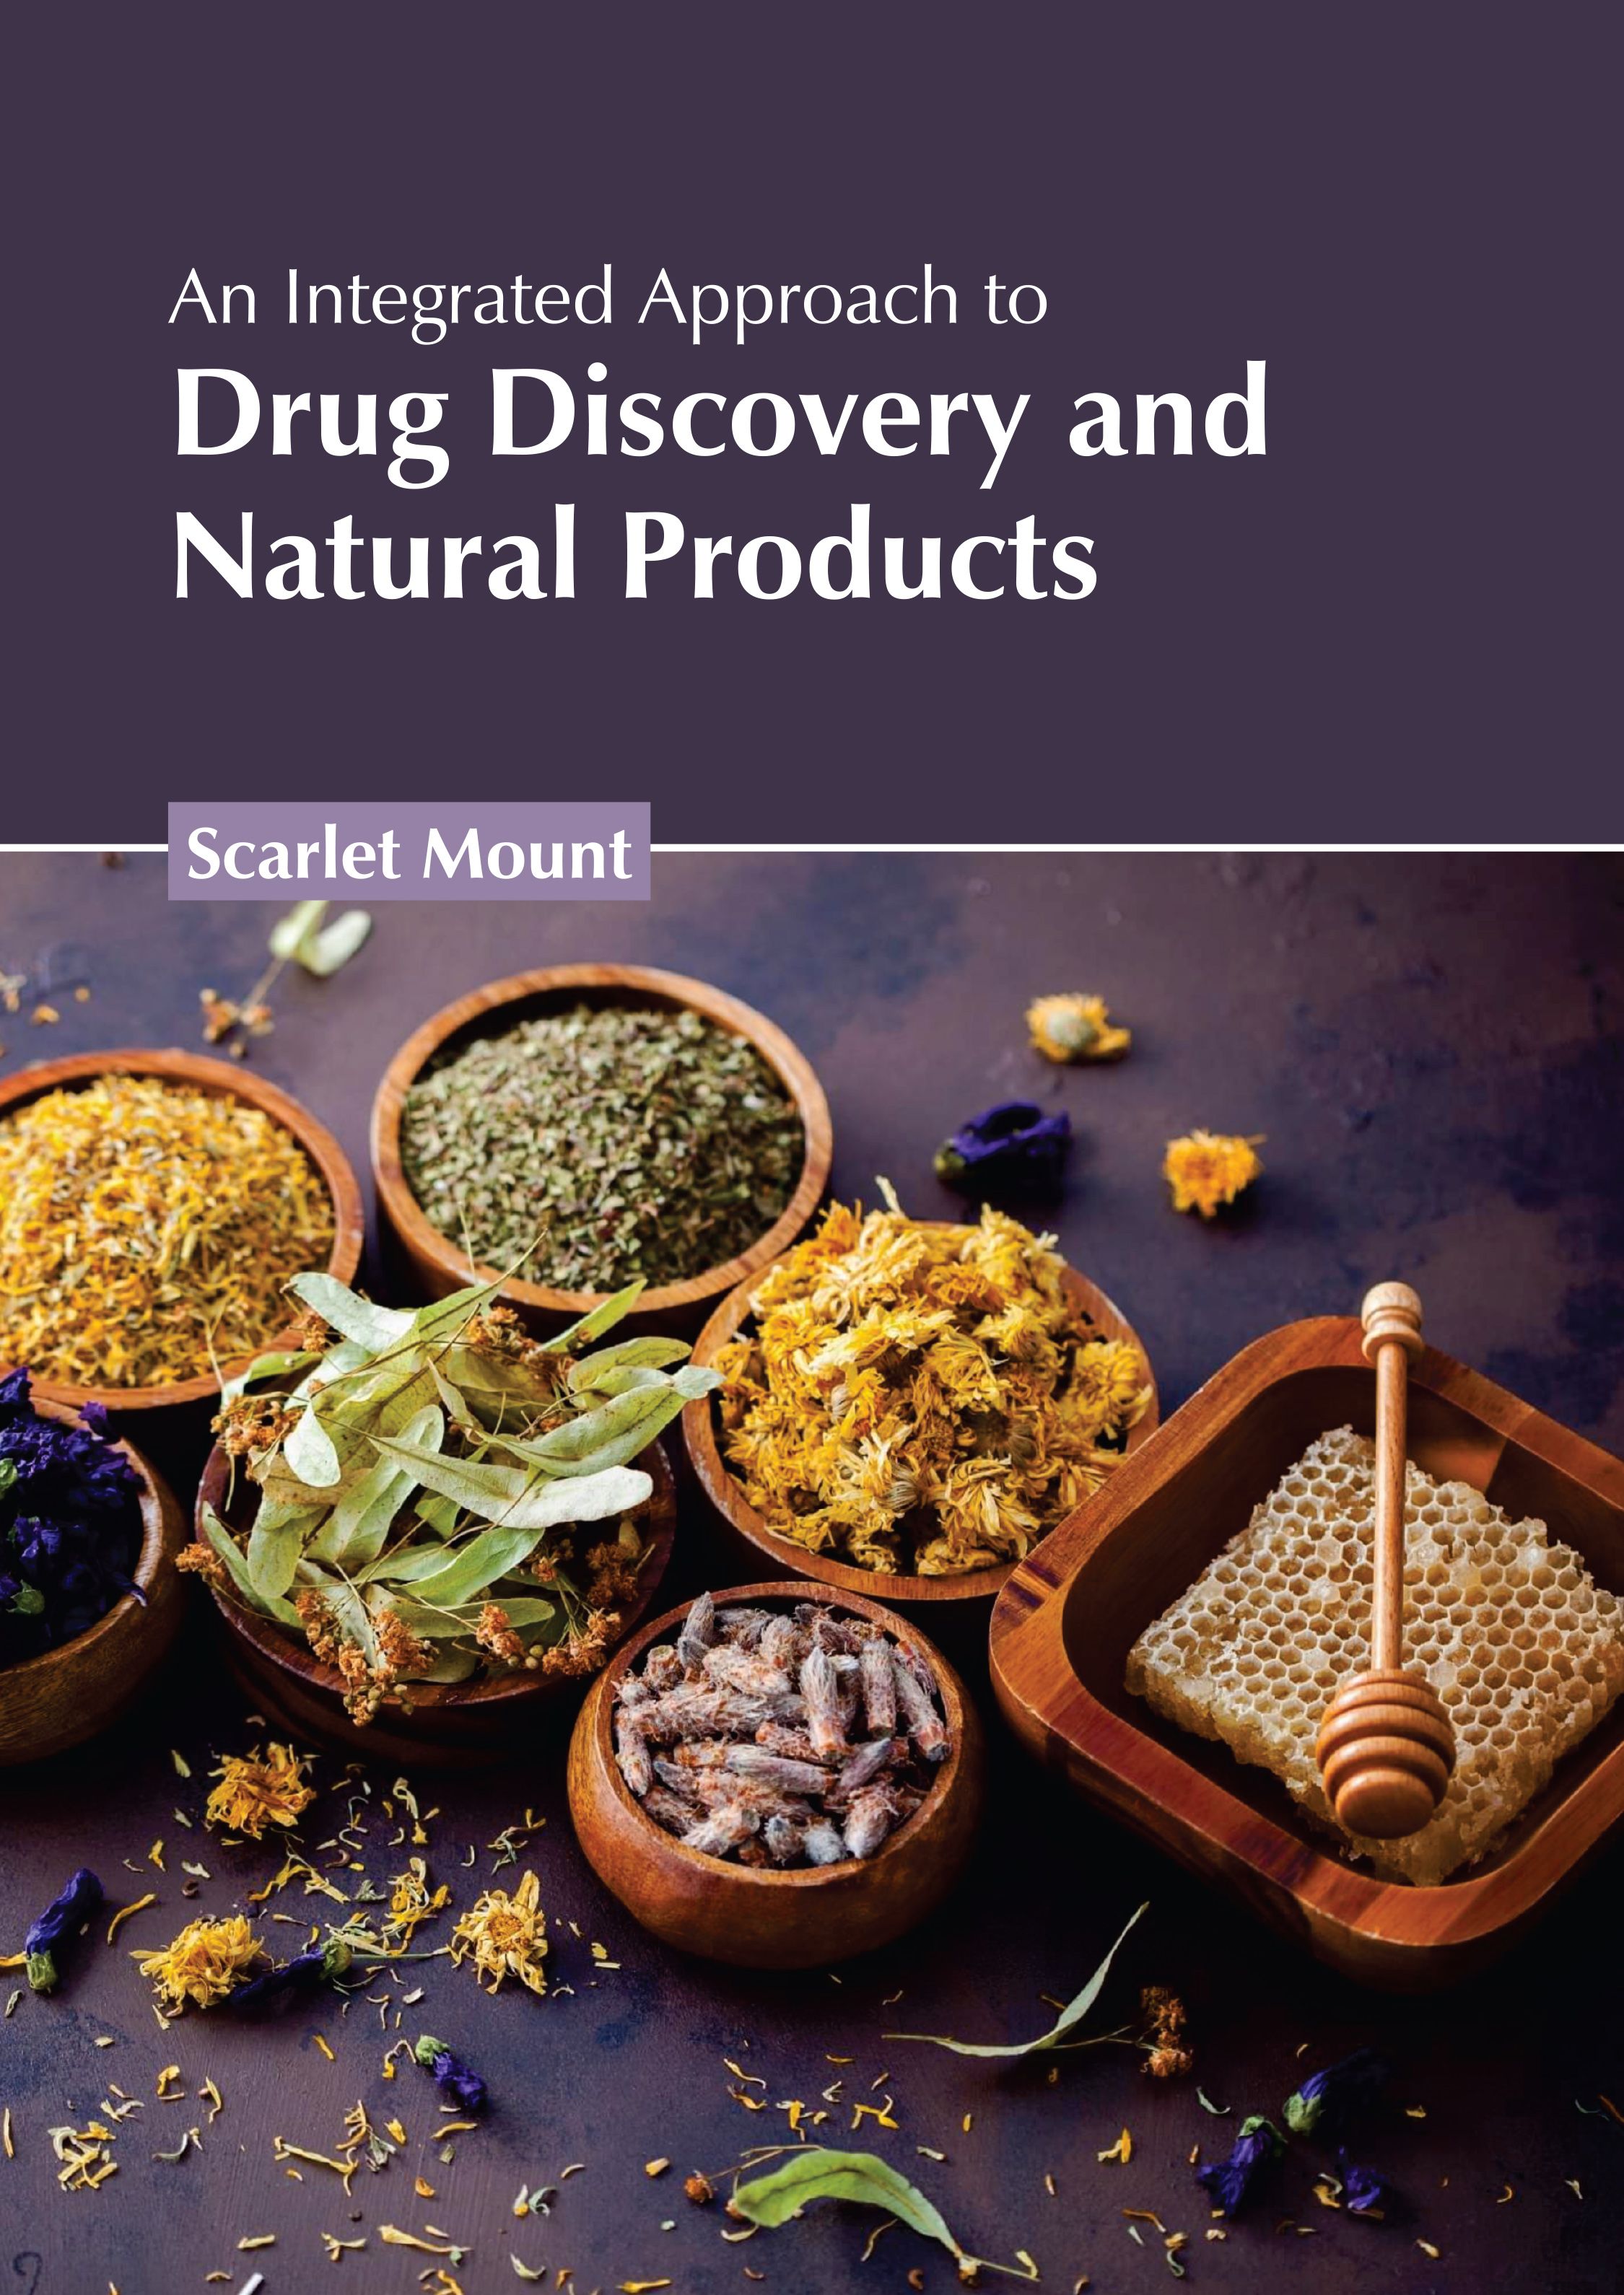 AN INTEGRATED APPROACH TO DRUG DISCOVERY AND NATURAL PRODUCTS